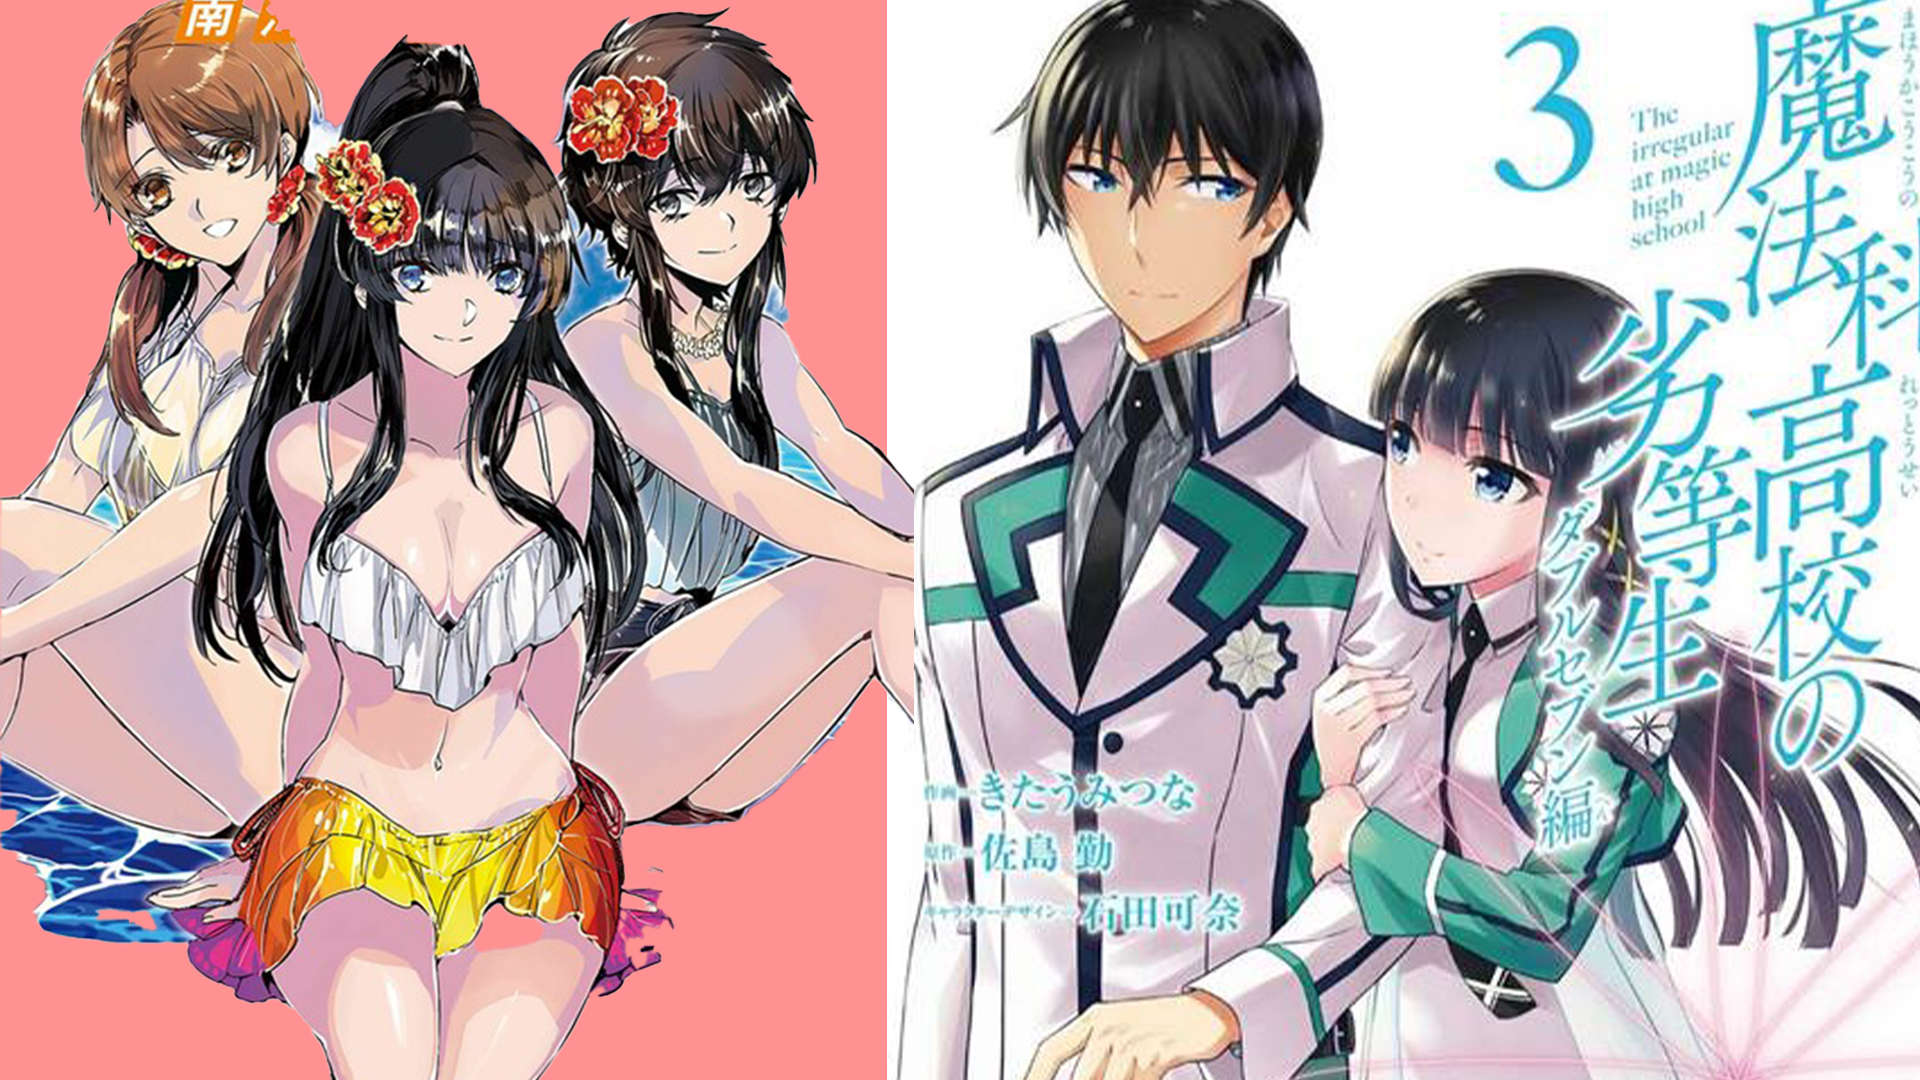 The Irregular at Magic Highschool: Southern Sea Arc's Final Chapter Out